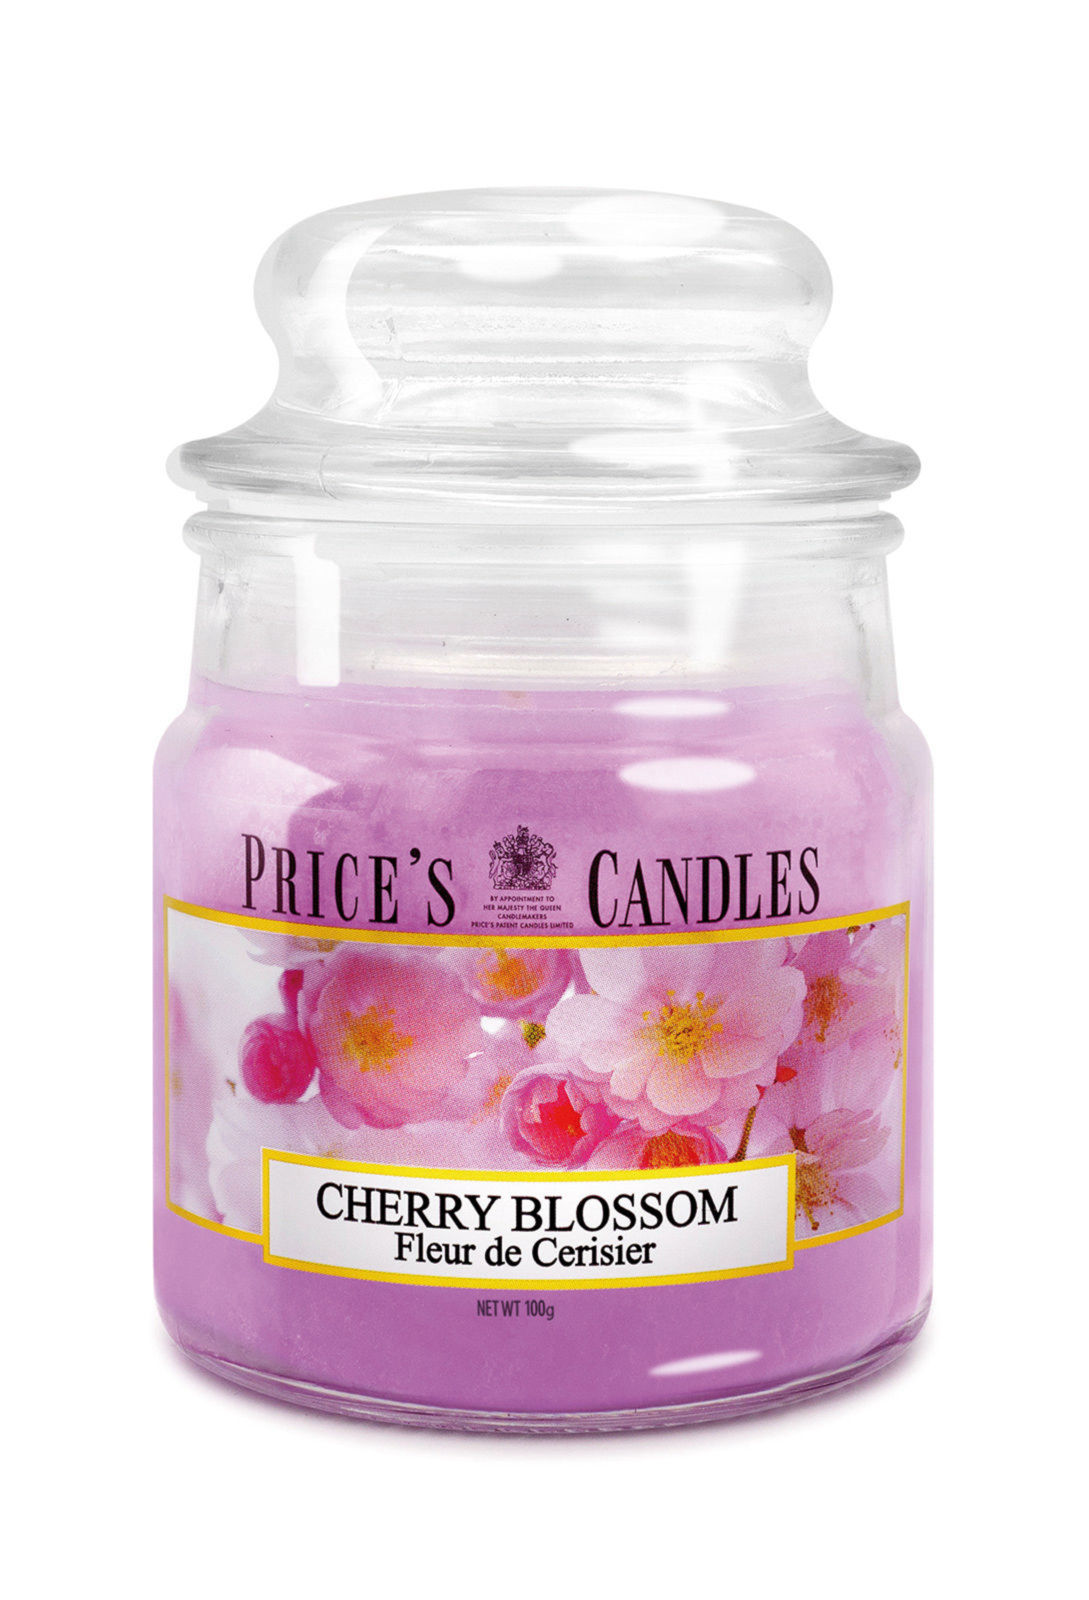 Prices Candle "Cherry Blossom" 100g  